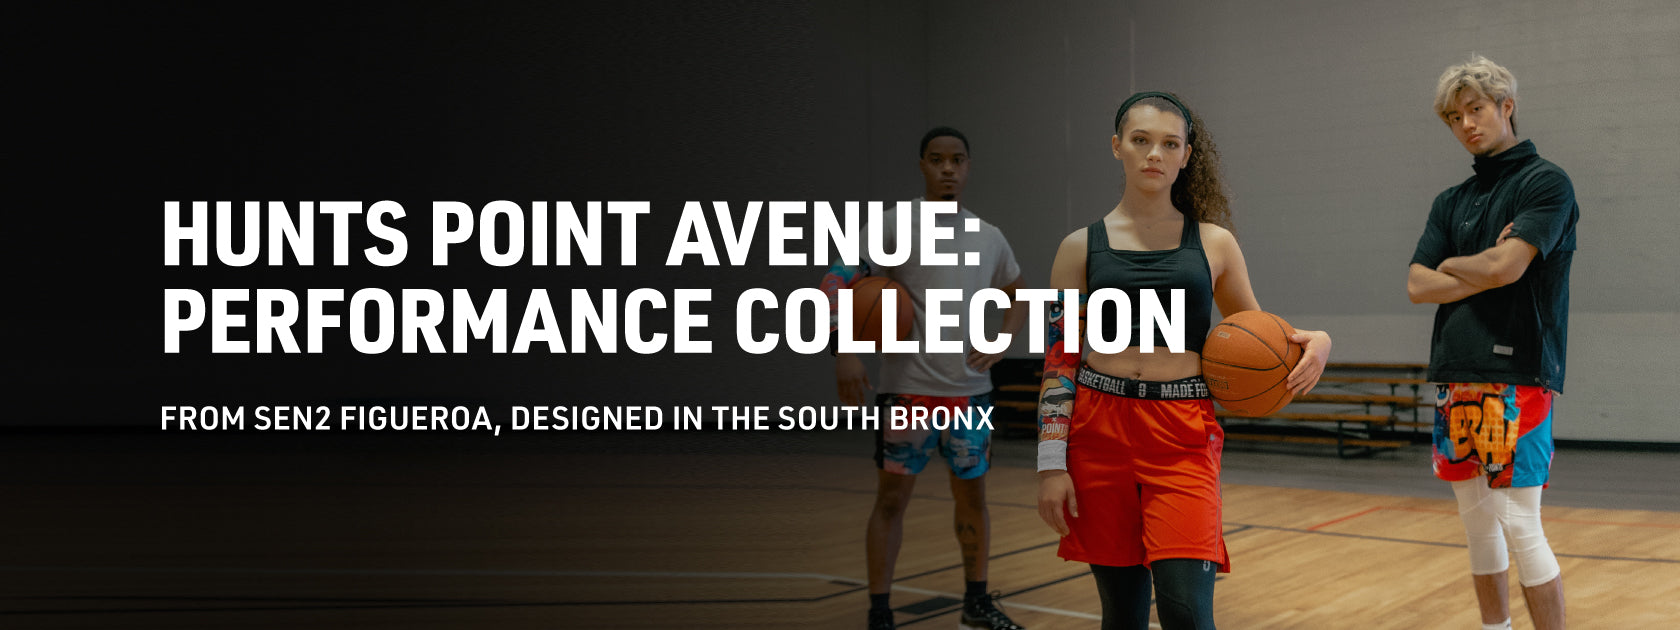 Hunts Point Avenue: Performance collection from Sen2 Figueroa, Designed in the South Bronx